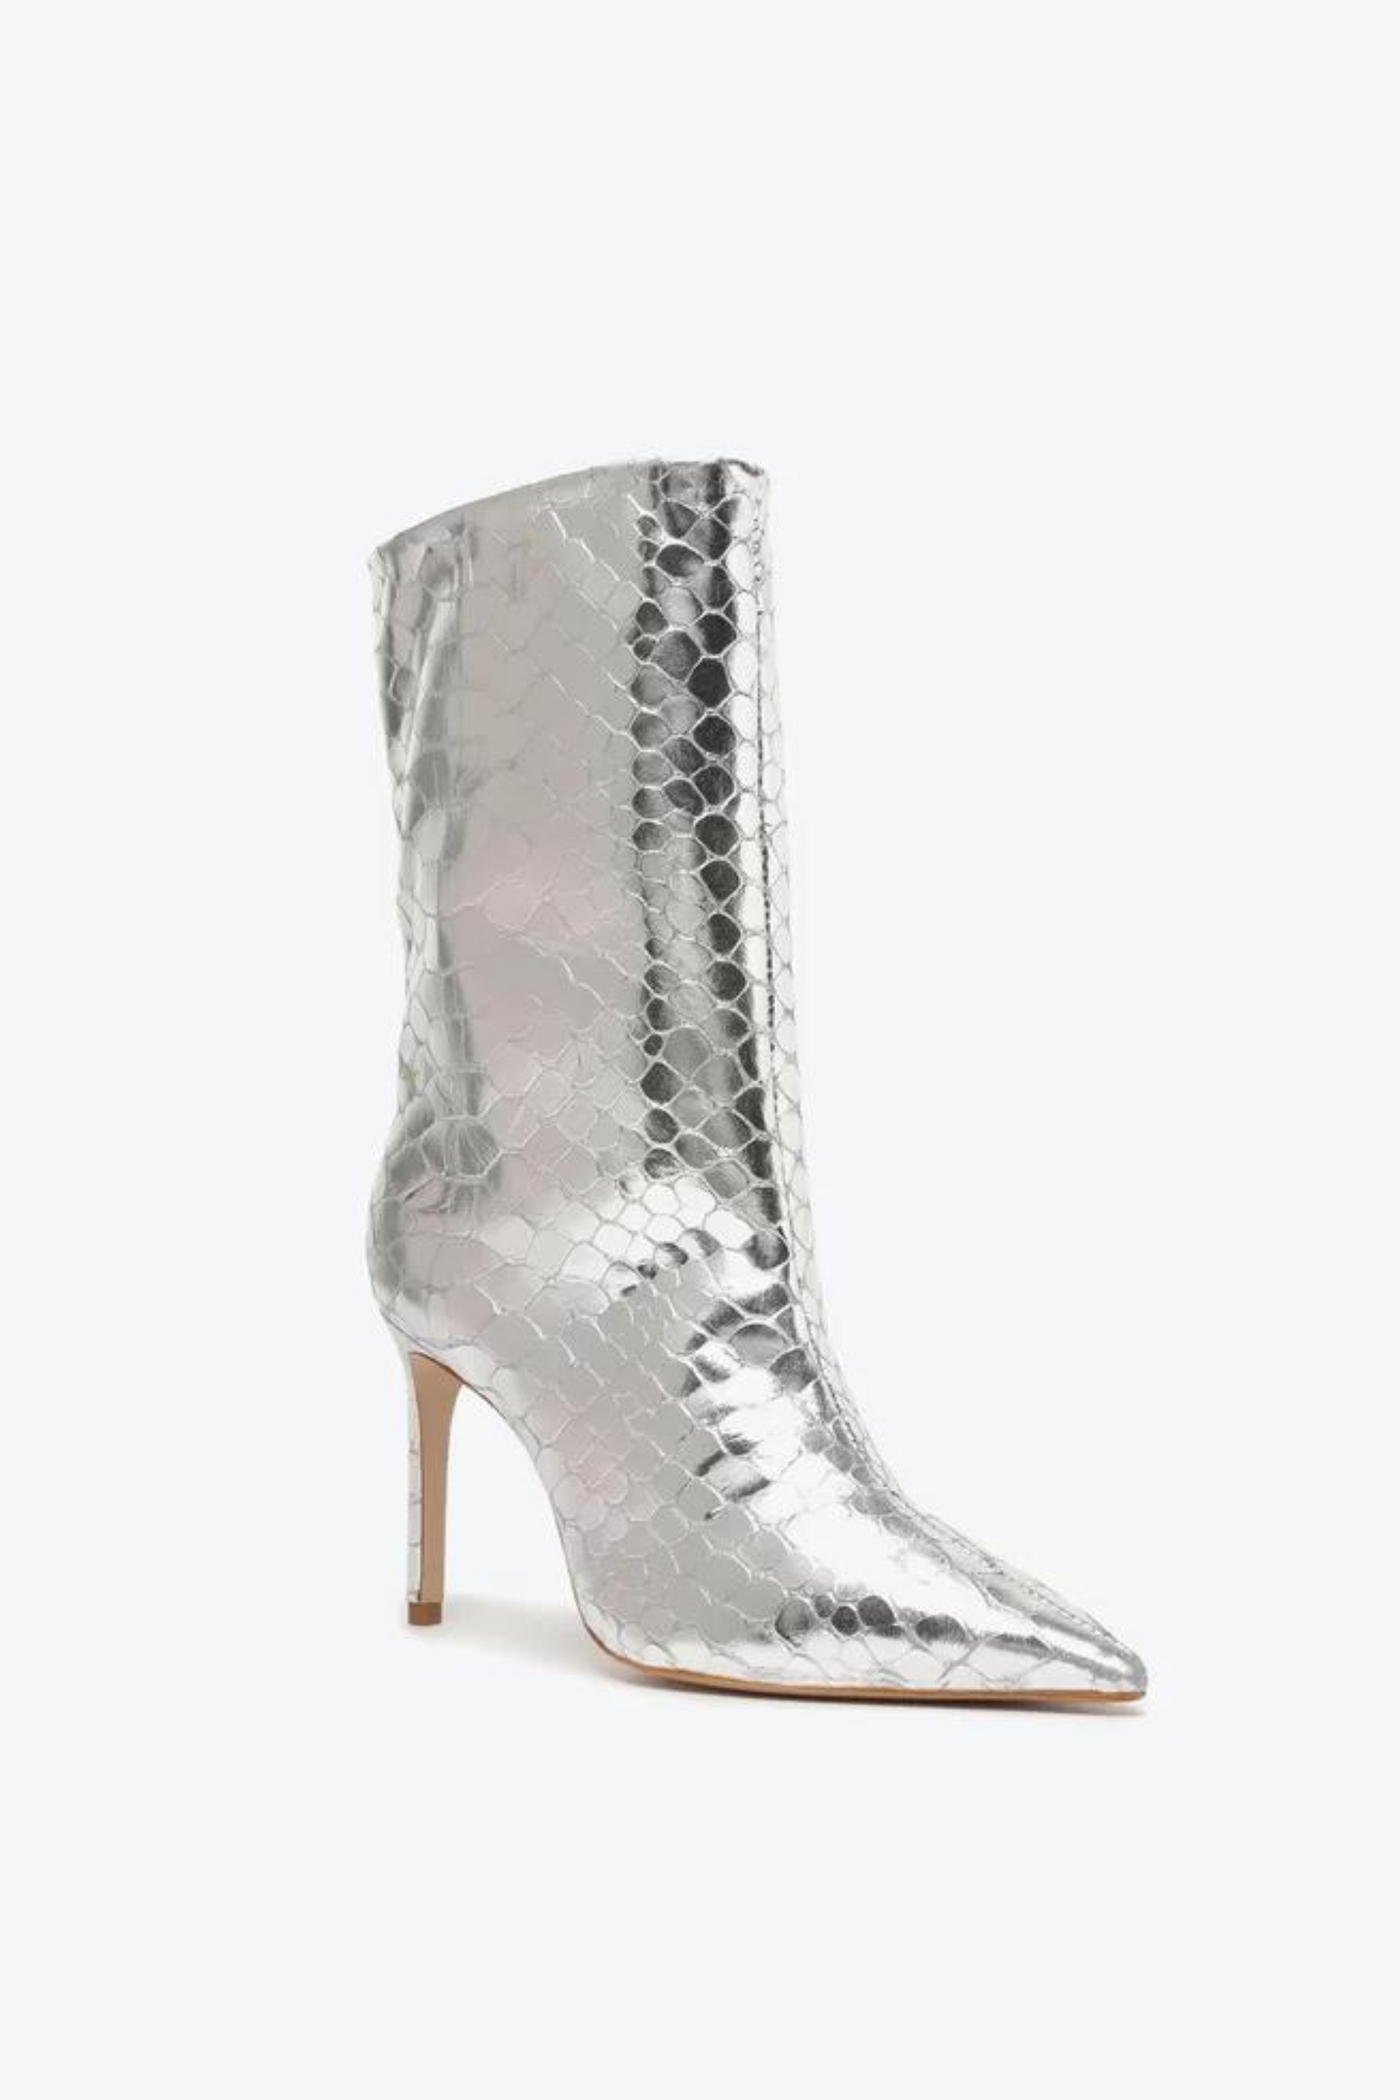 MARY BOOTS THIN HEEL MIDDLE UPPER SILVER